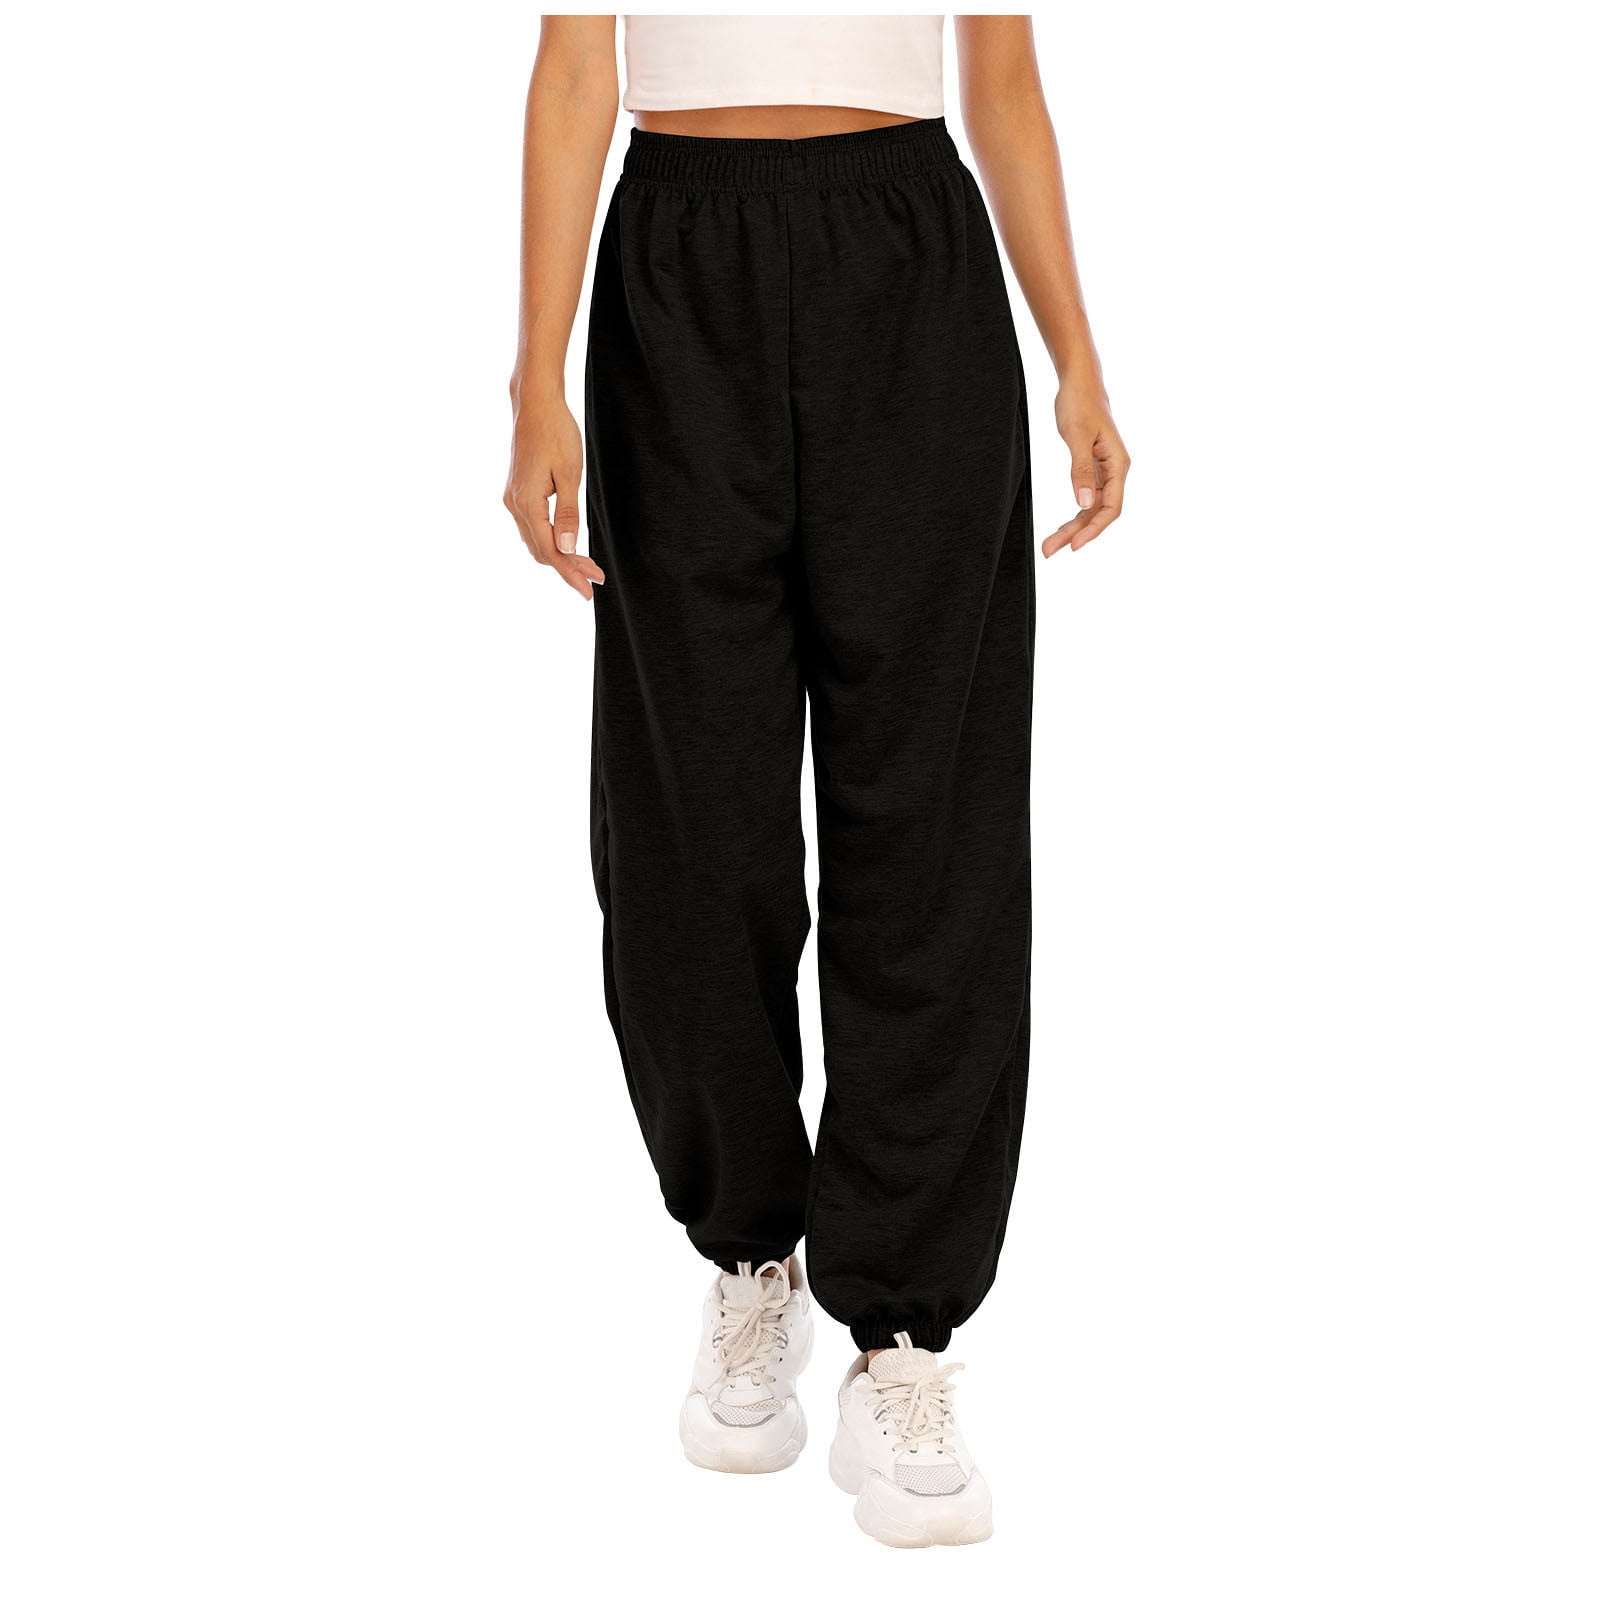 XFLWAM Women’s Casual Baggy Sweatpants High Waisted Running Joggers Pants  Athletic Trousers with Pockets Drawstring Track Pants Black XL